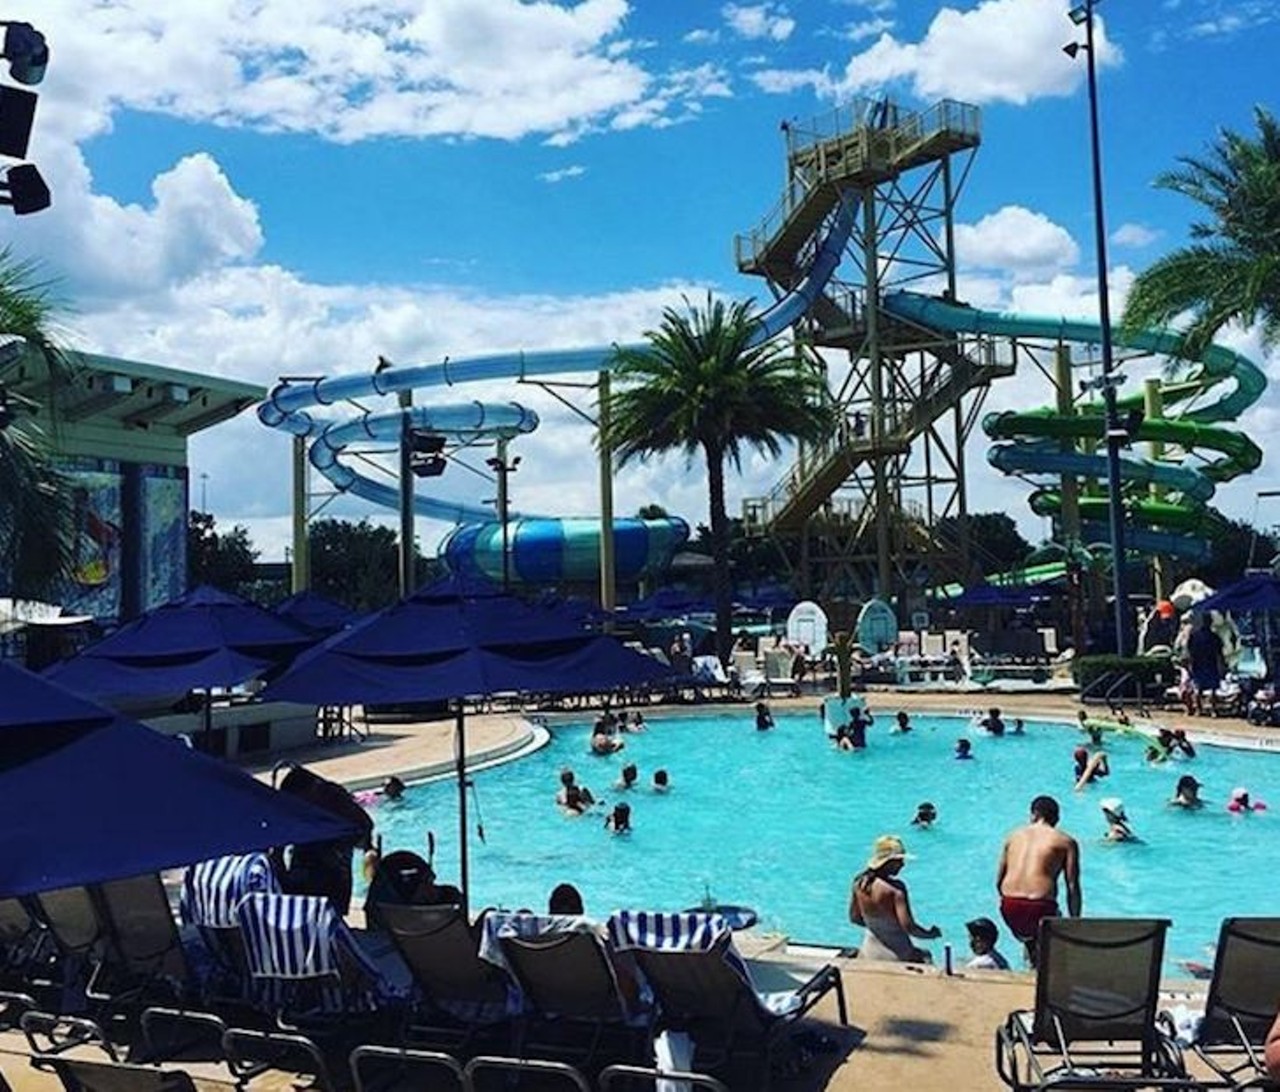 Gaylord Palms Hotel and Convention Center 
6000 W. Osceola Parkway | 407-586-0000 | 7 a.m. - 11 p.m.
Gaylord Palms features an Everglades-inspired Cypress Springs Family Fun Water Park that has a zero-entry swimming pool with four slides, a FlowRider for bodyboarding, a multilevel tree house playground and an active lagoon. Through August 13, guests can celebrate Summerfest at Gaylord Palms featuring Surf In & Rock Out. Guests can check out the poolside games, face painting, airbrush tattoos and more, and DJ Cowabunga Chris spins tunes from 12 p.m. to 4 p.m. daily. You can check out all the activities here. There&#146;s also a South Beach Pool that is an exclusive adult-only swimming pool with a restaurant and bar if you&#146;re more intent on kicking back and relaxing. Only guests staying at Gaylord Palms are welcome to access Cypress Springs Family Fun Water Park. The hours that the attractions at the water park are open vary as they are weather permitting, so you&#146;ll want to check the skies before planning your day there.
Photo via coswatte/Instagram